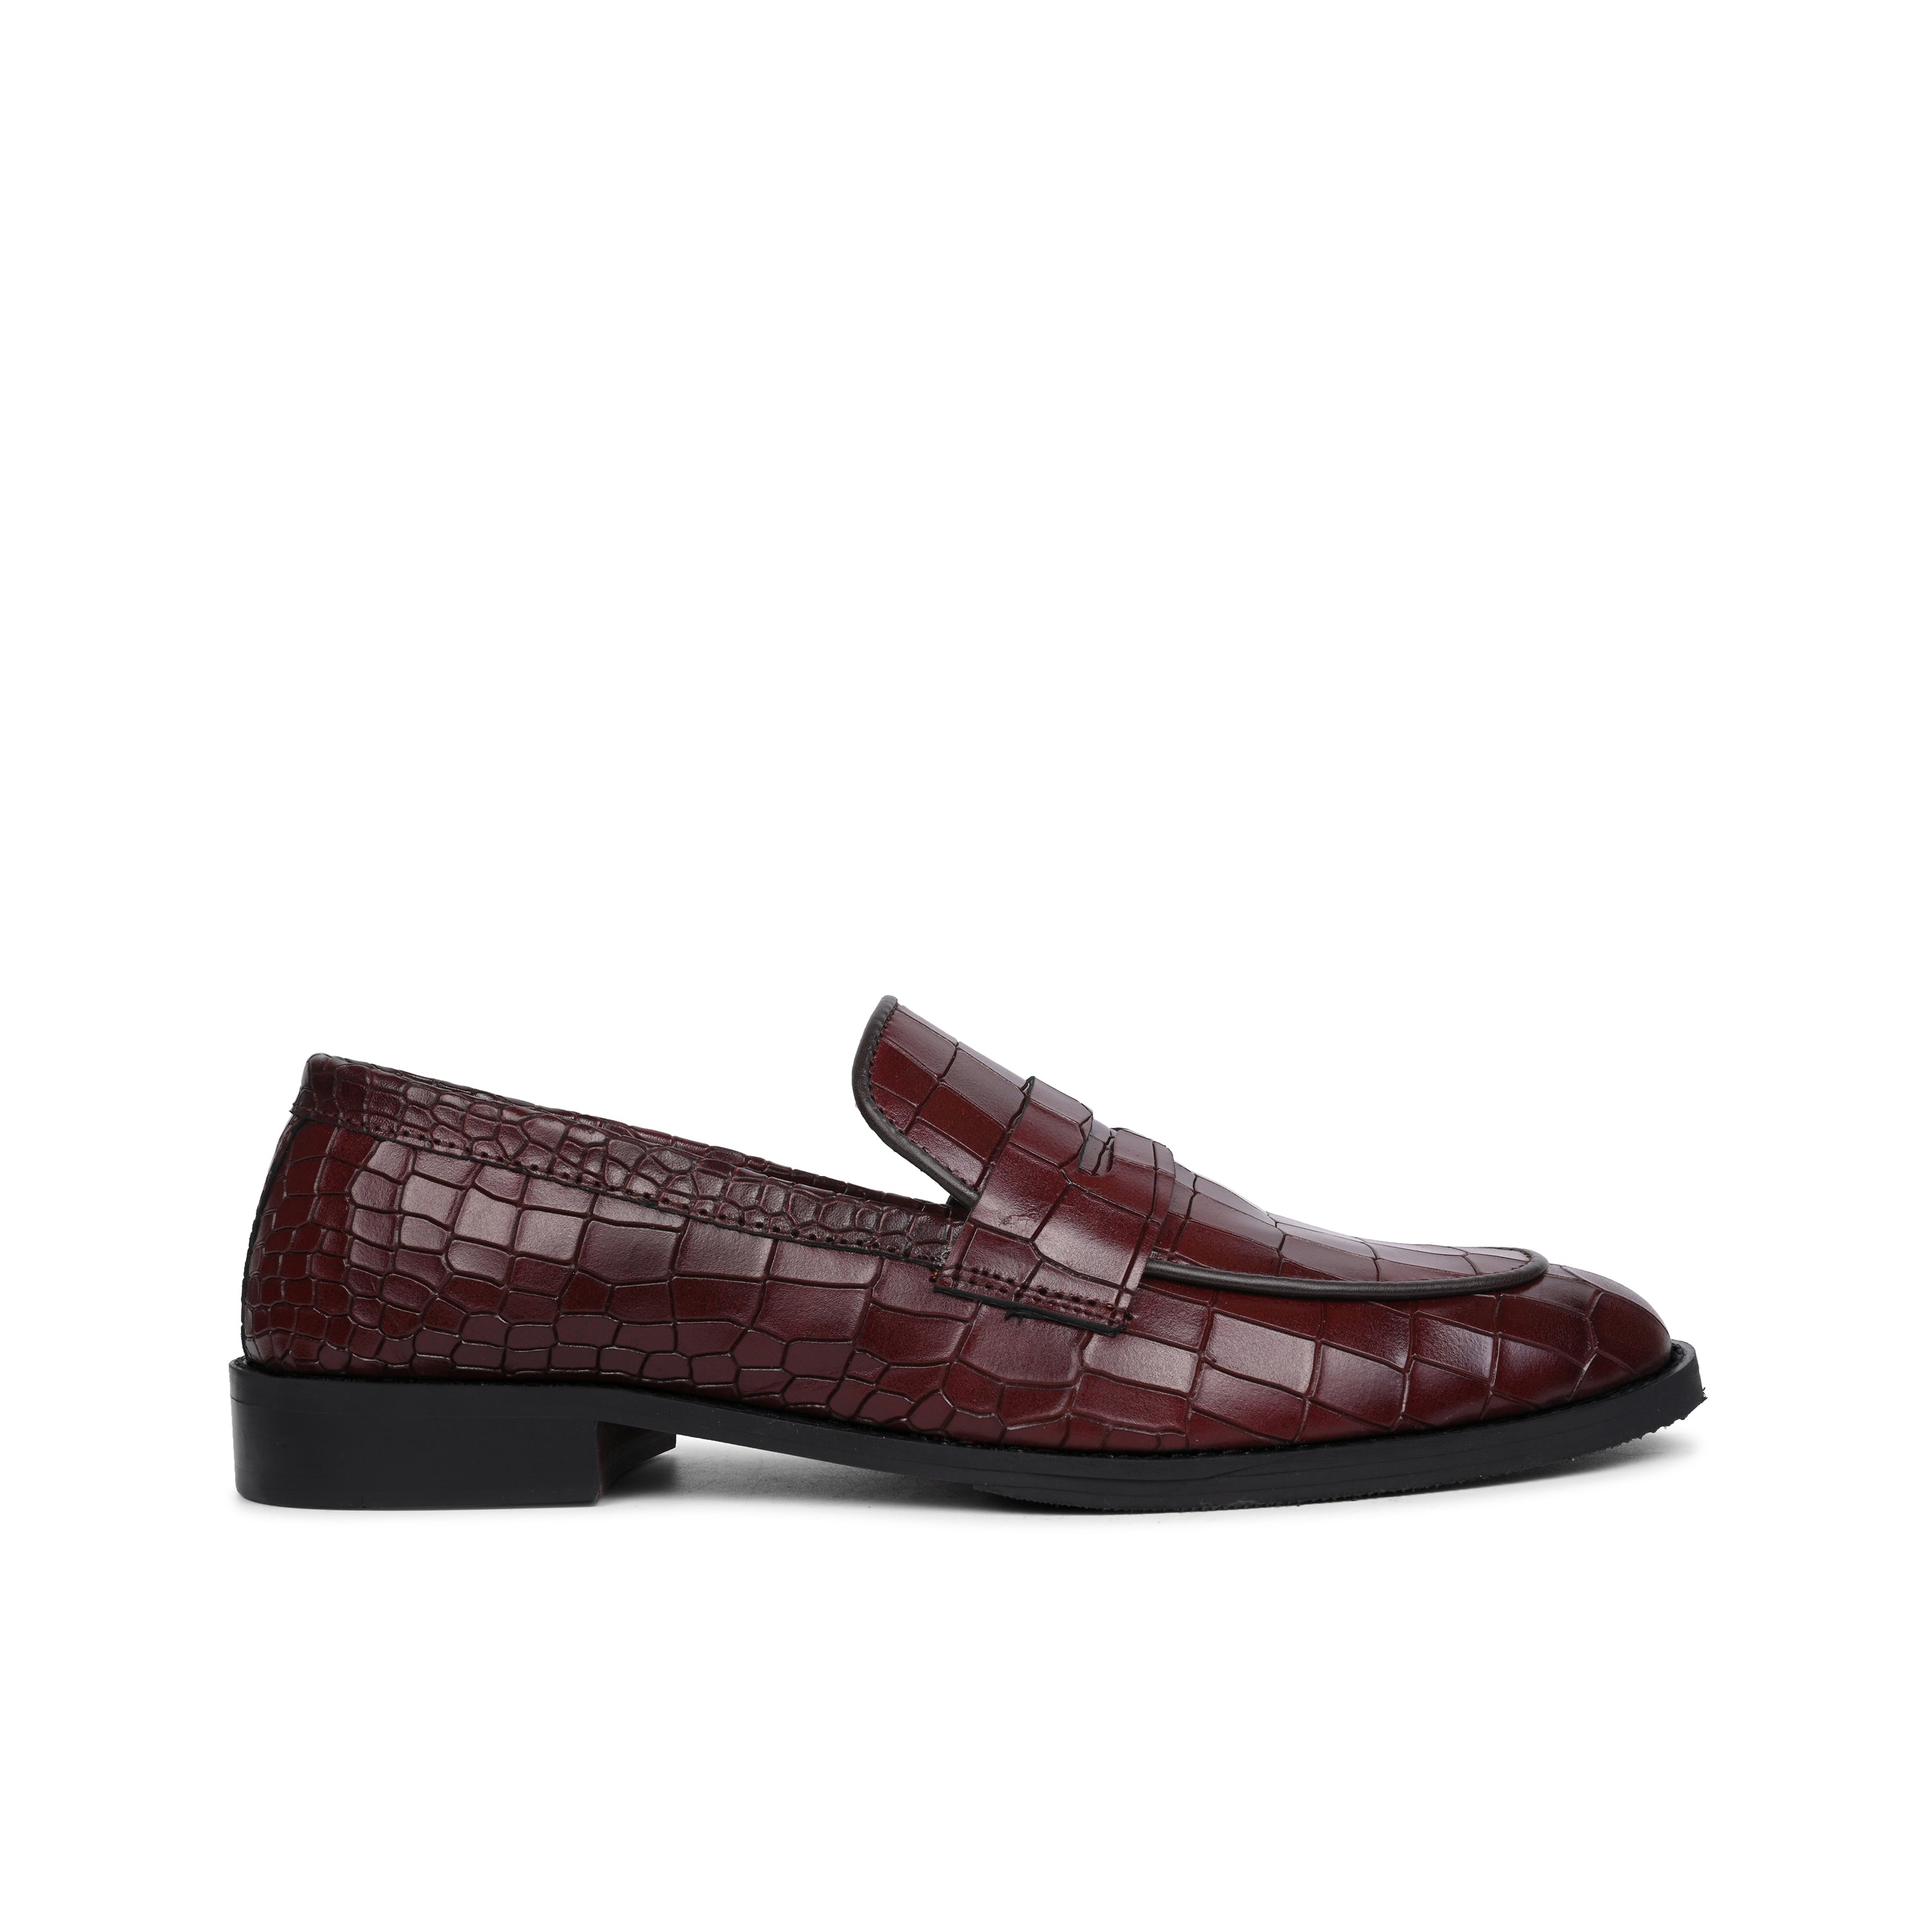 Sybil Wise Loafers